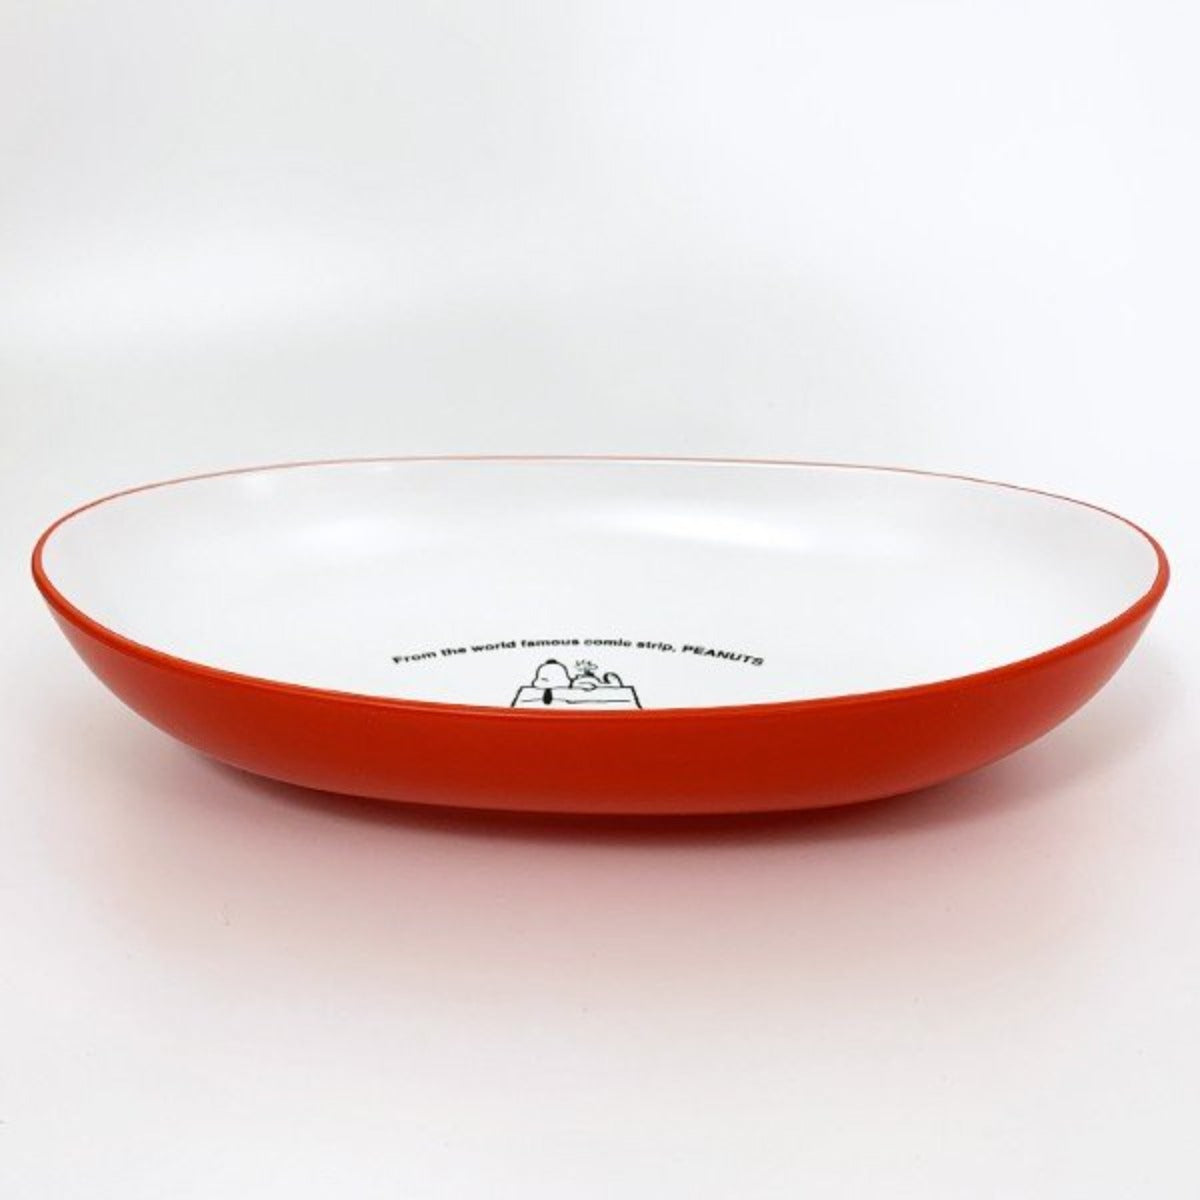 Plate Japan Oval Snoopy Red